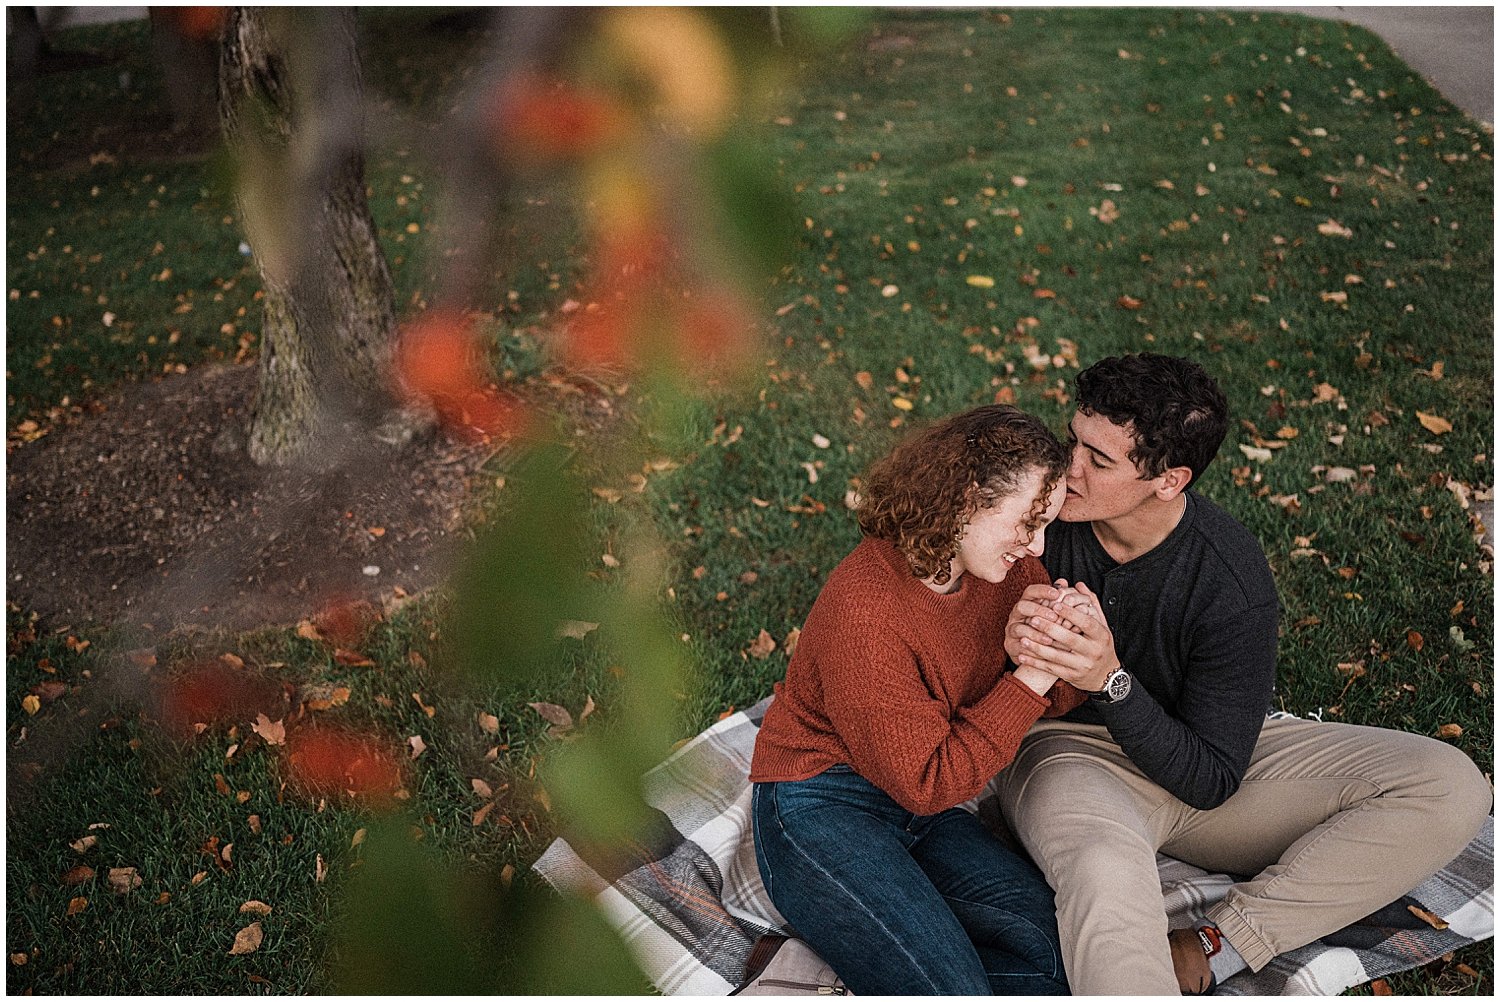 Lincoln Park Engagement Session | Kettering, Ohio